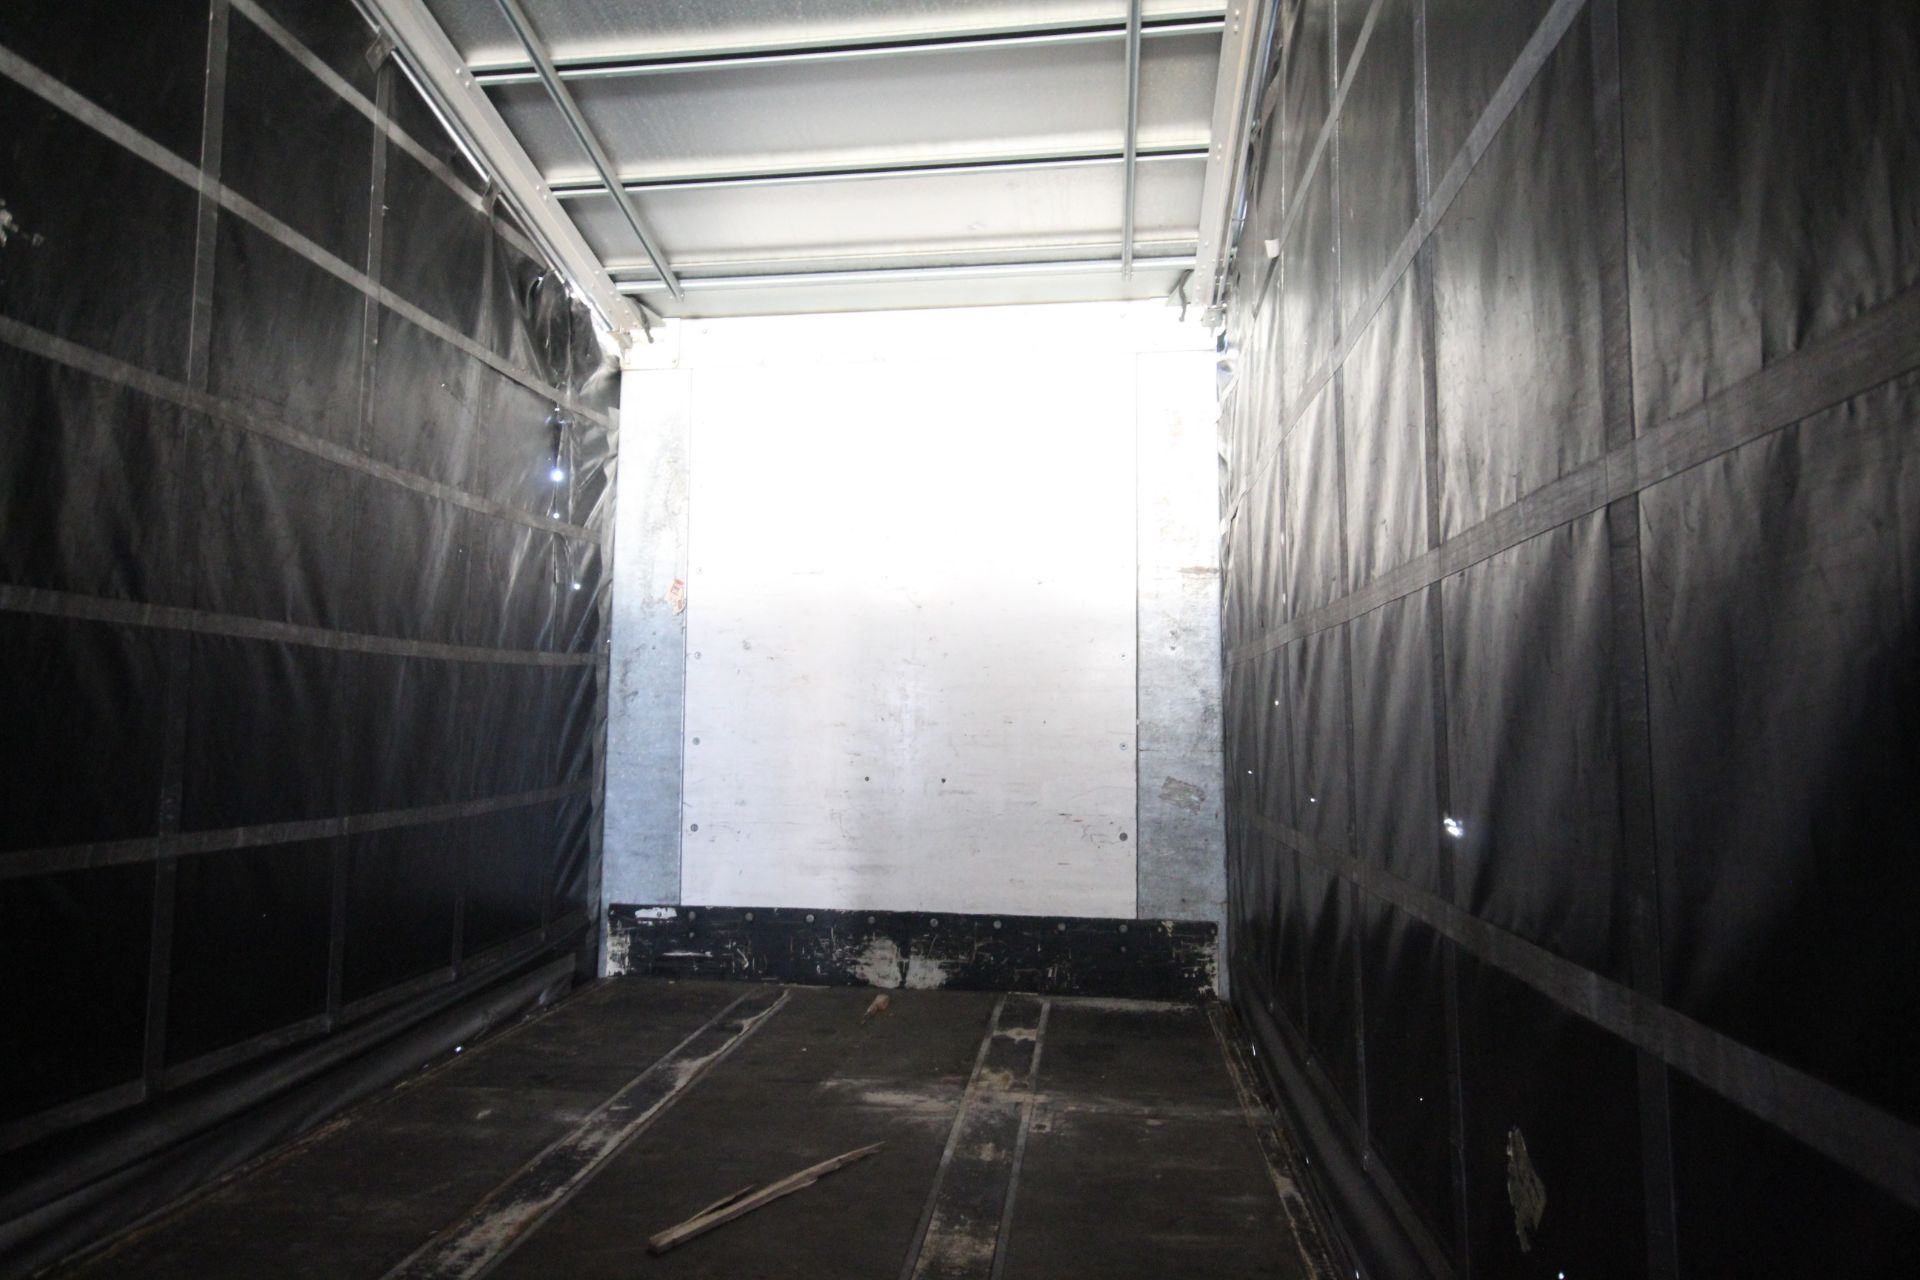 Montracon 39T 13.6m tri-axle step frame double deck curtain-side trailer. Registration C527332. - Image 76 of 83